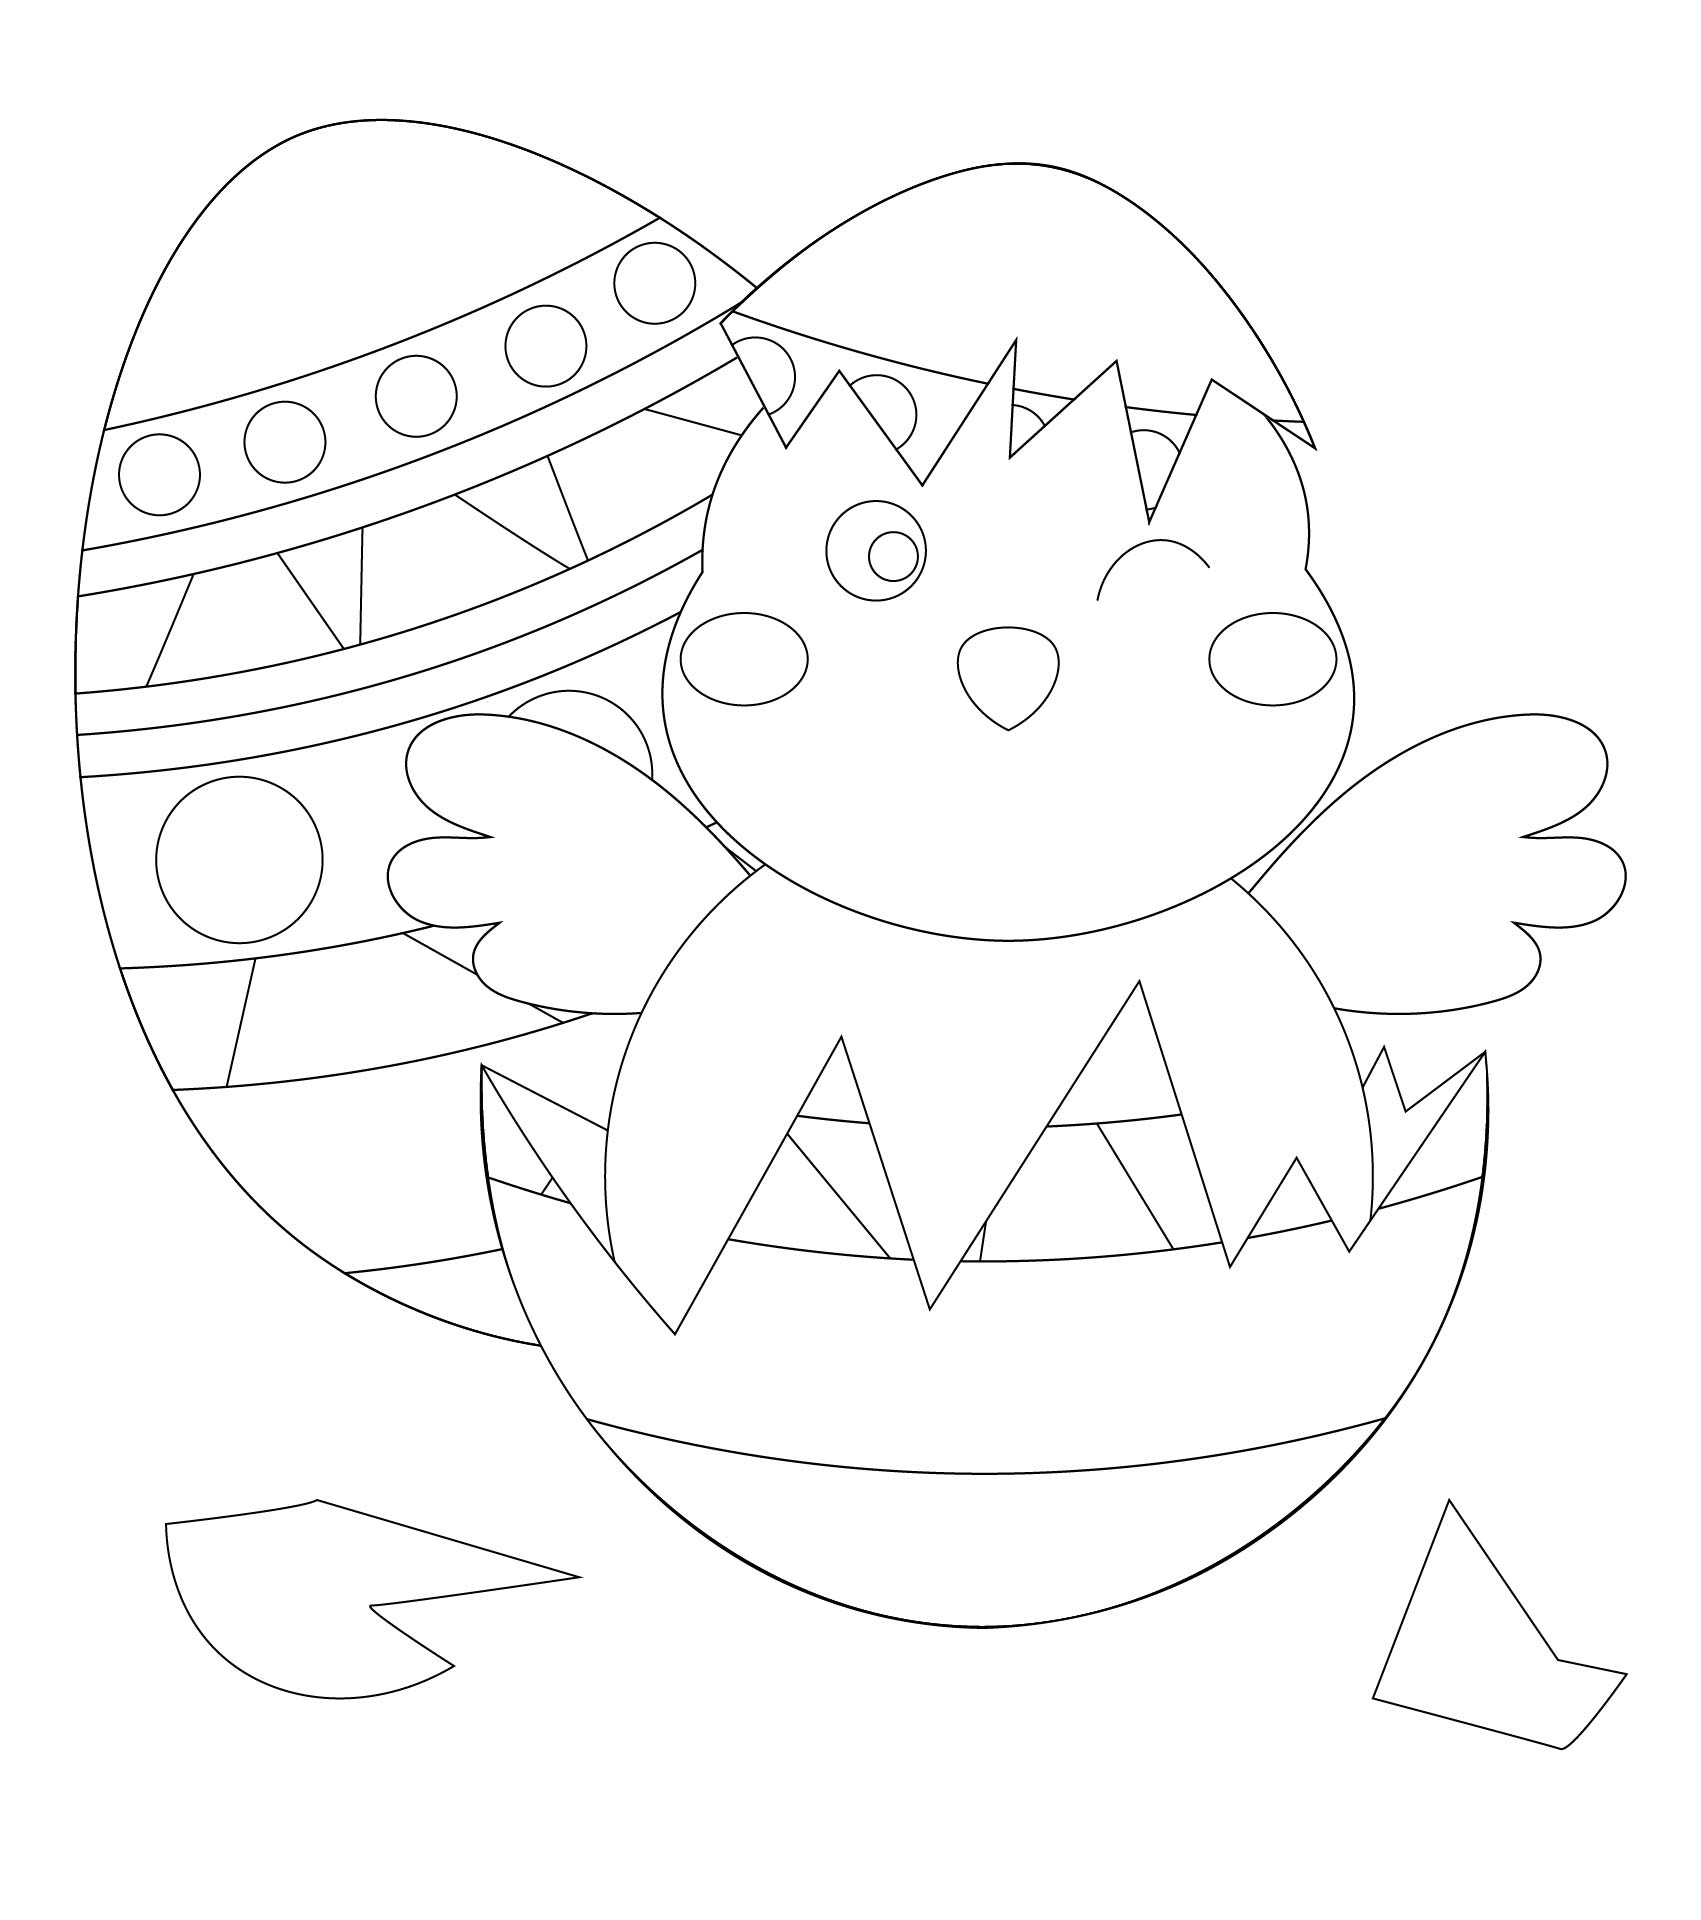 Easter Chick Template Printable